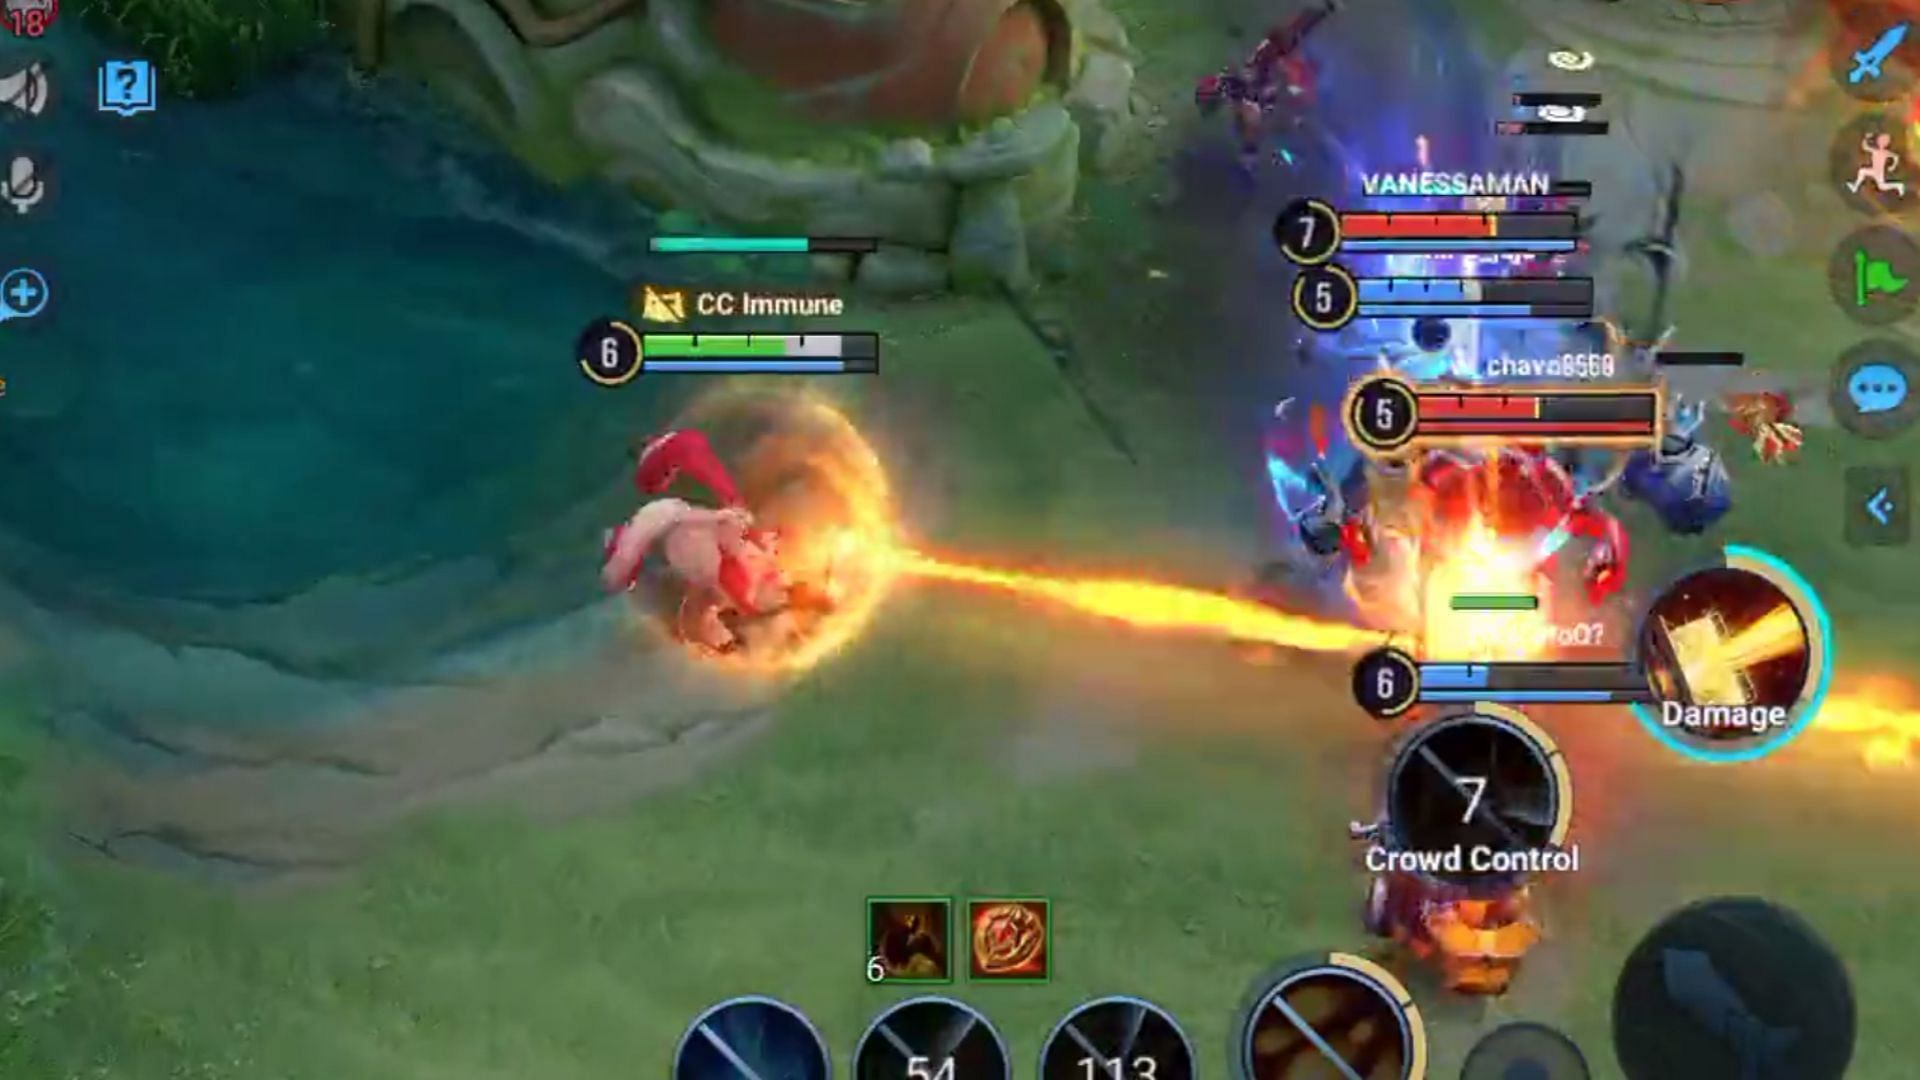 Stay at a distance and attack from afar in team fights (Image via Level Infinite)